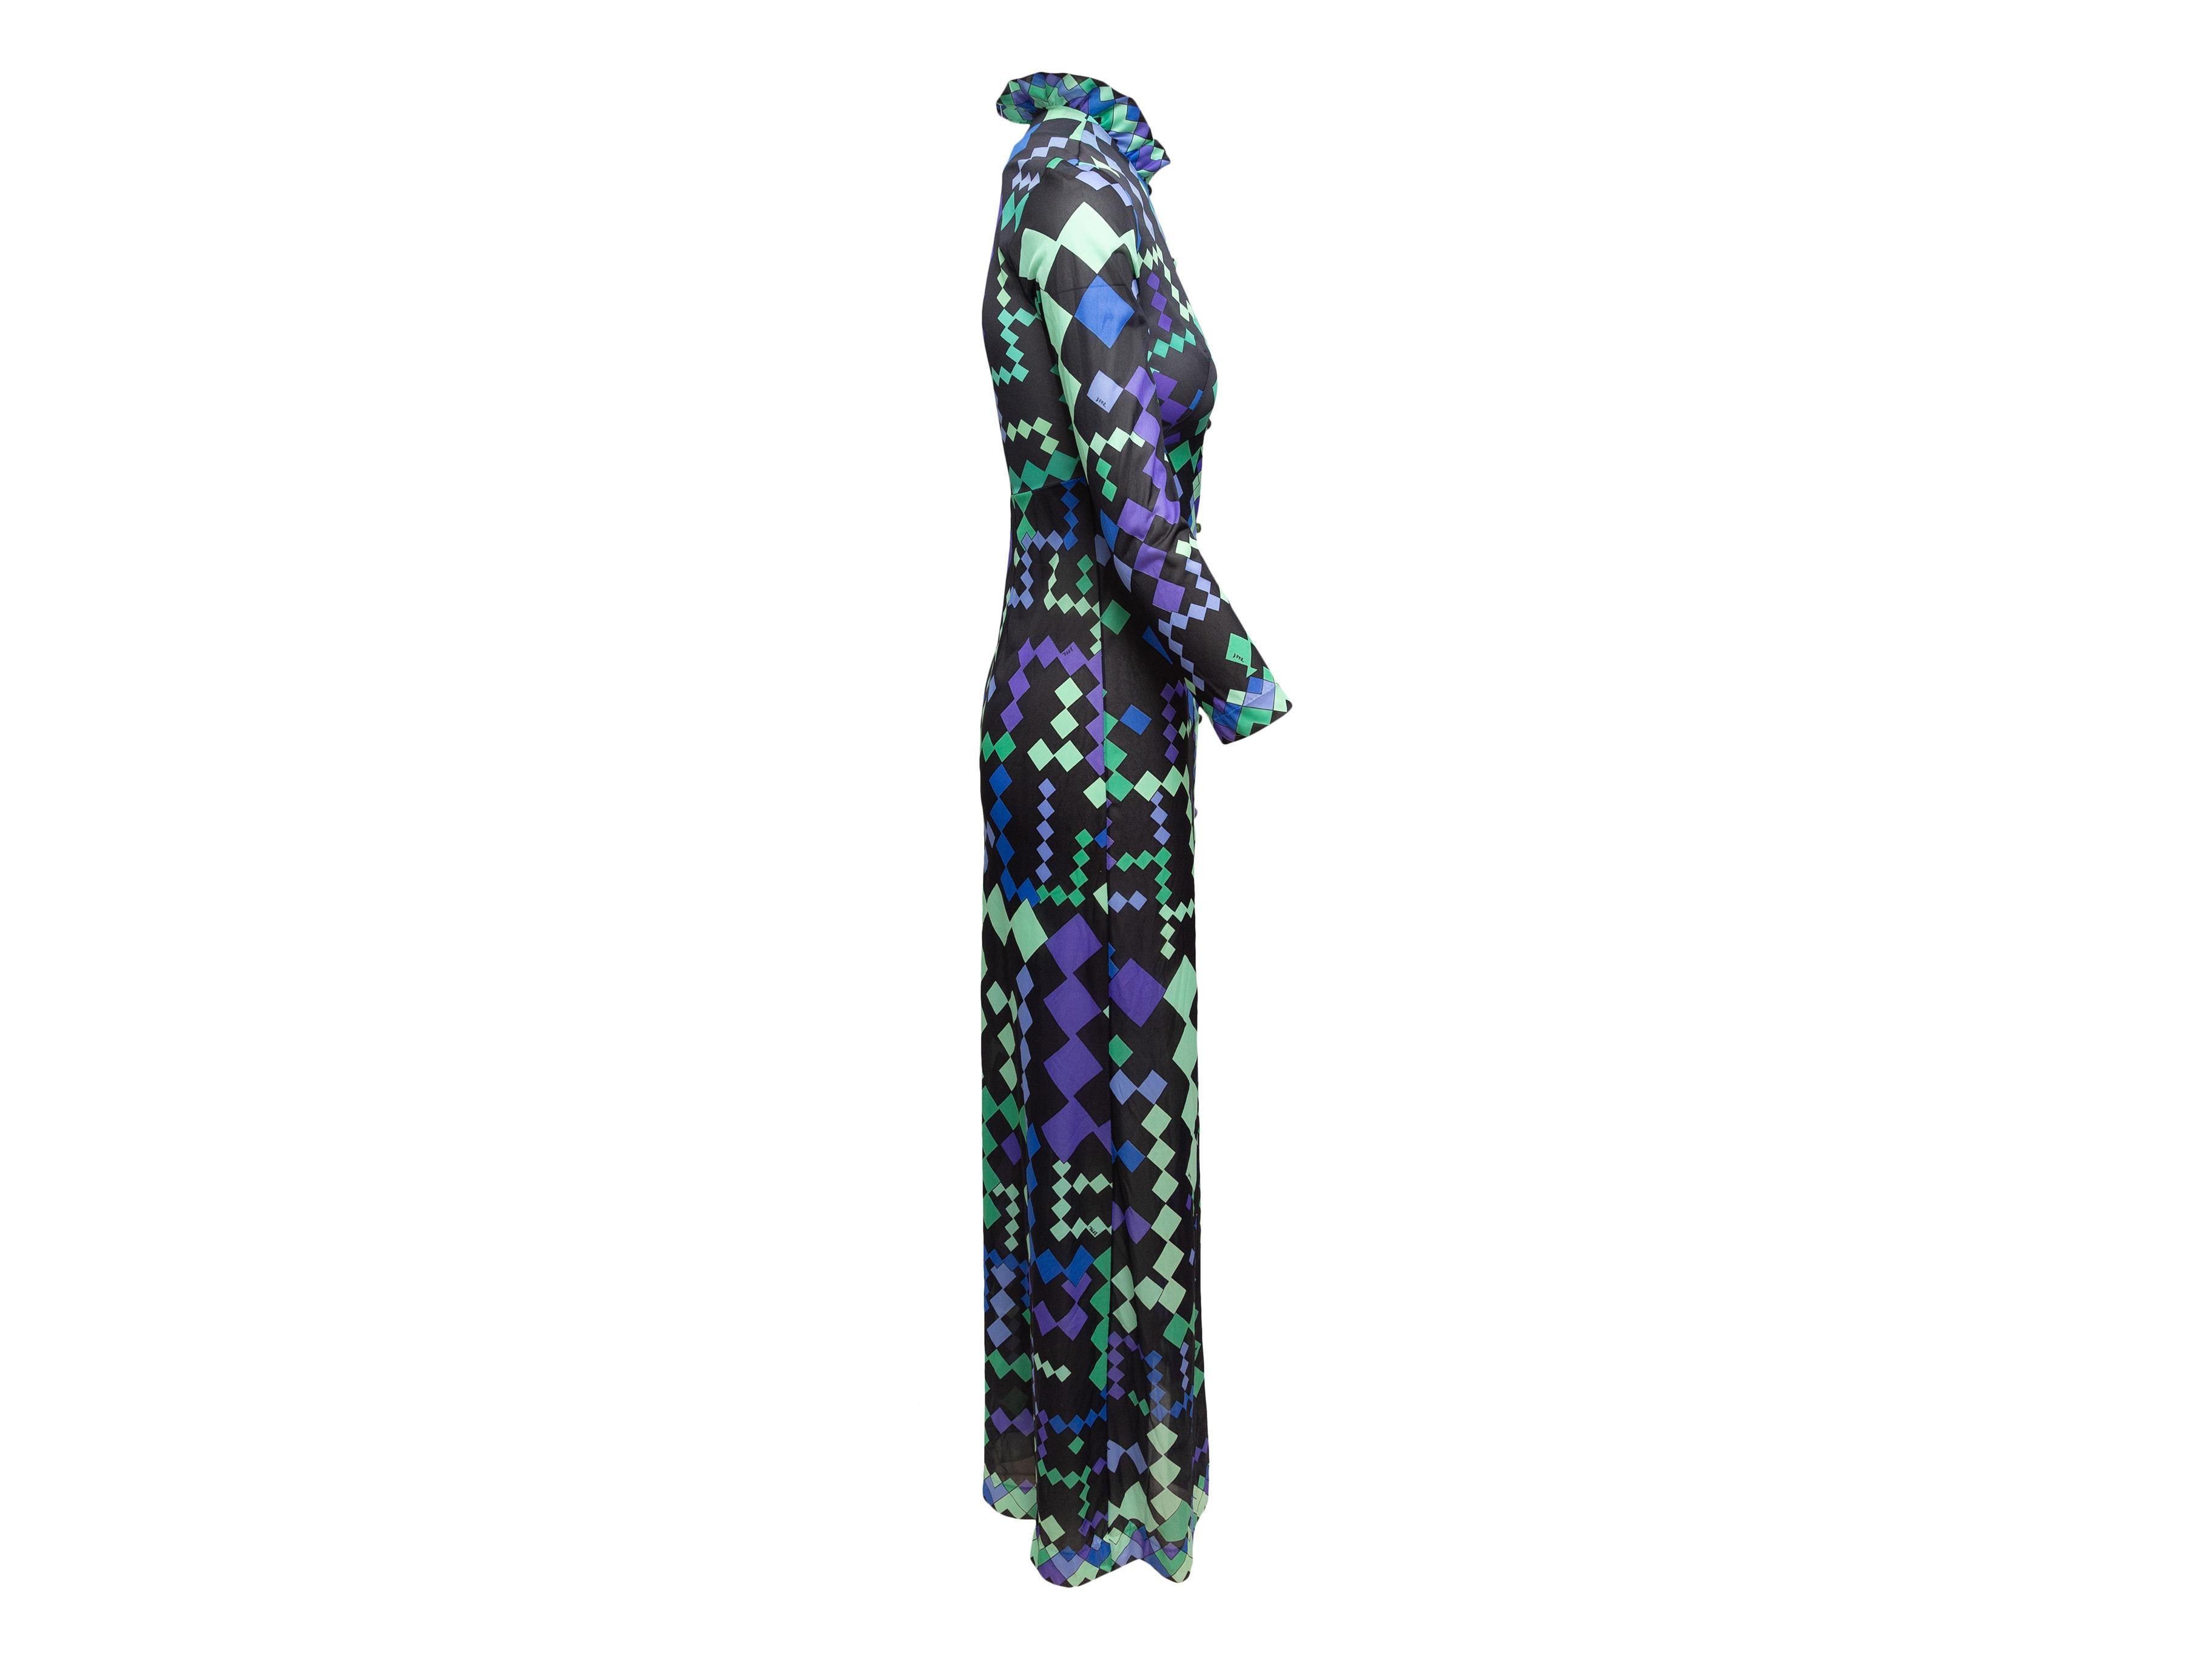 Product details: Vintage black and multicolor long sleeve maxi nightgown by Emilio Pucci. Geometric print throughout. High ruffle collar. Button closures at center front. Designer size P. 31